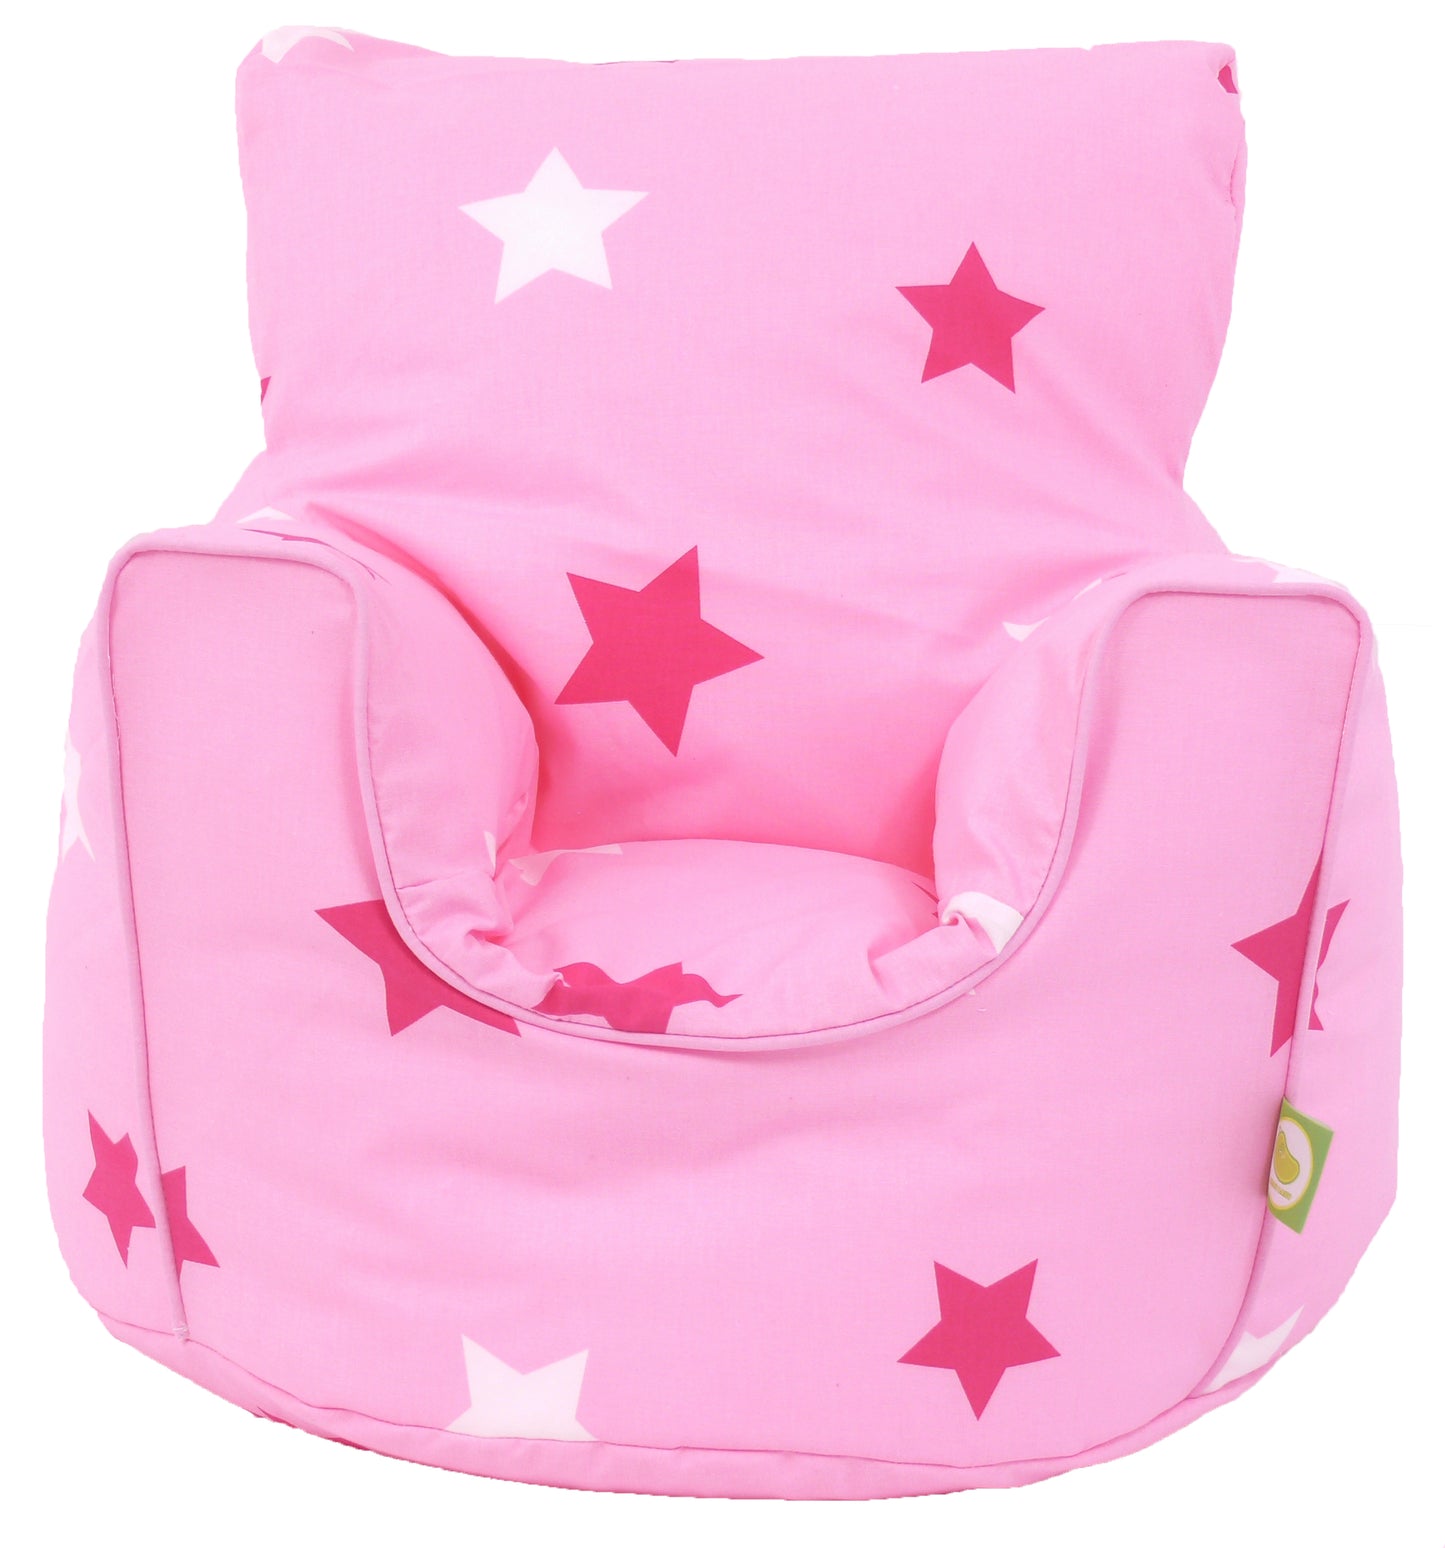 Cotton Pink Stars Bean Bag Arm Chair with Beans Child / Teen size